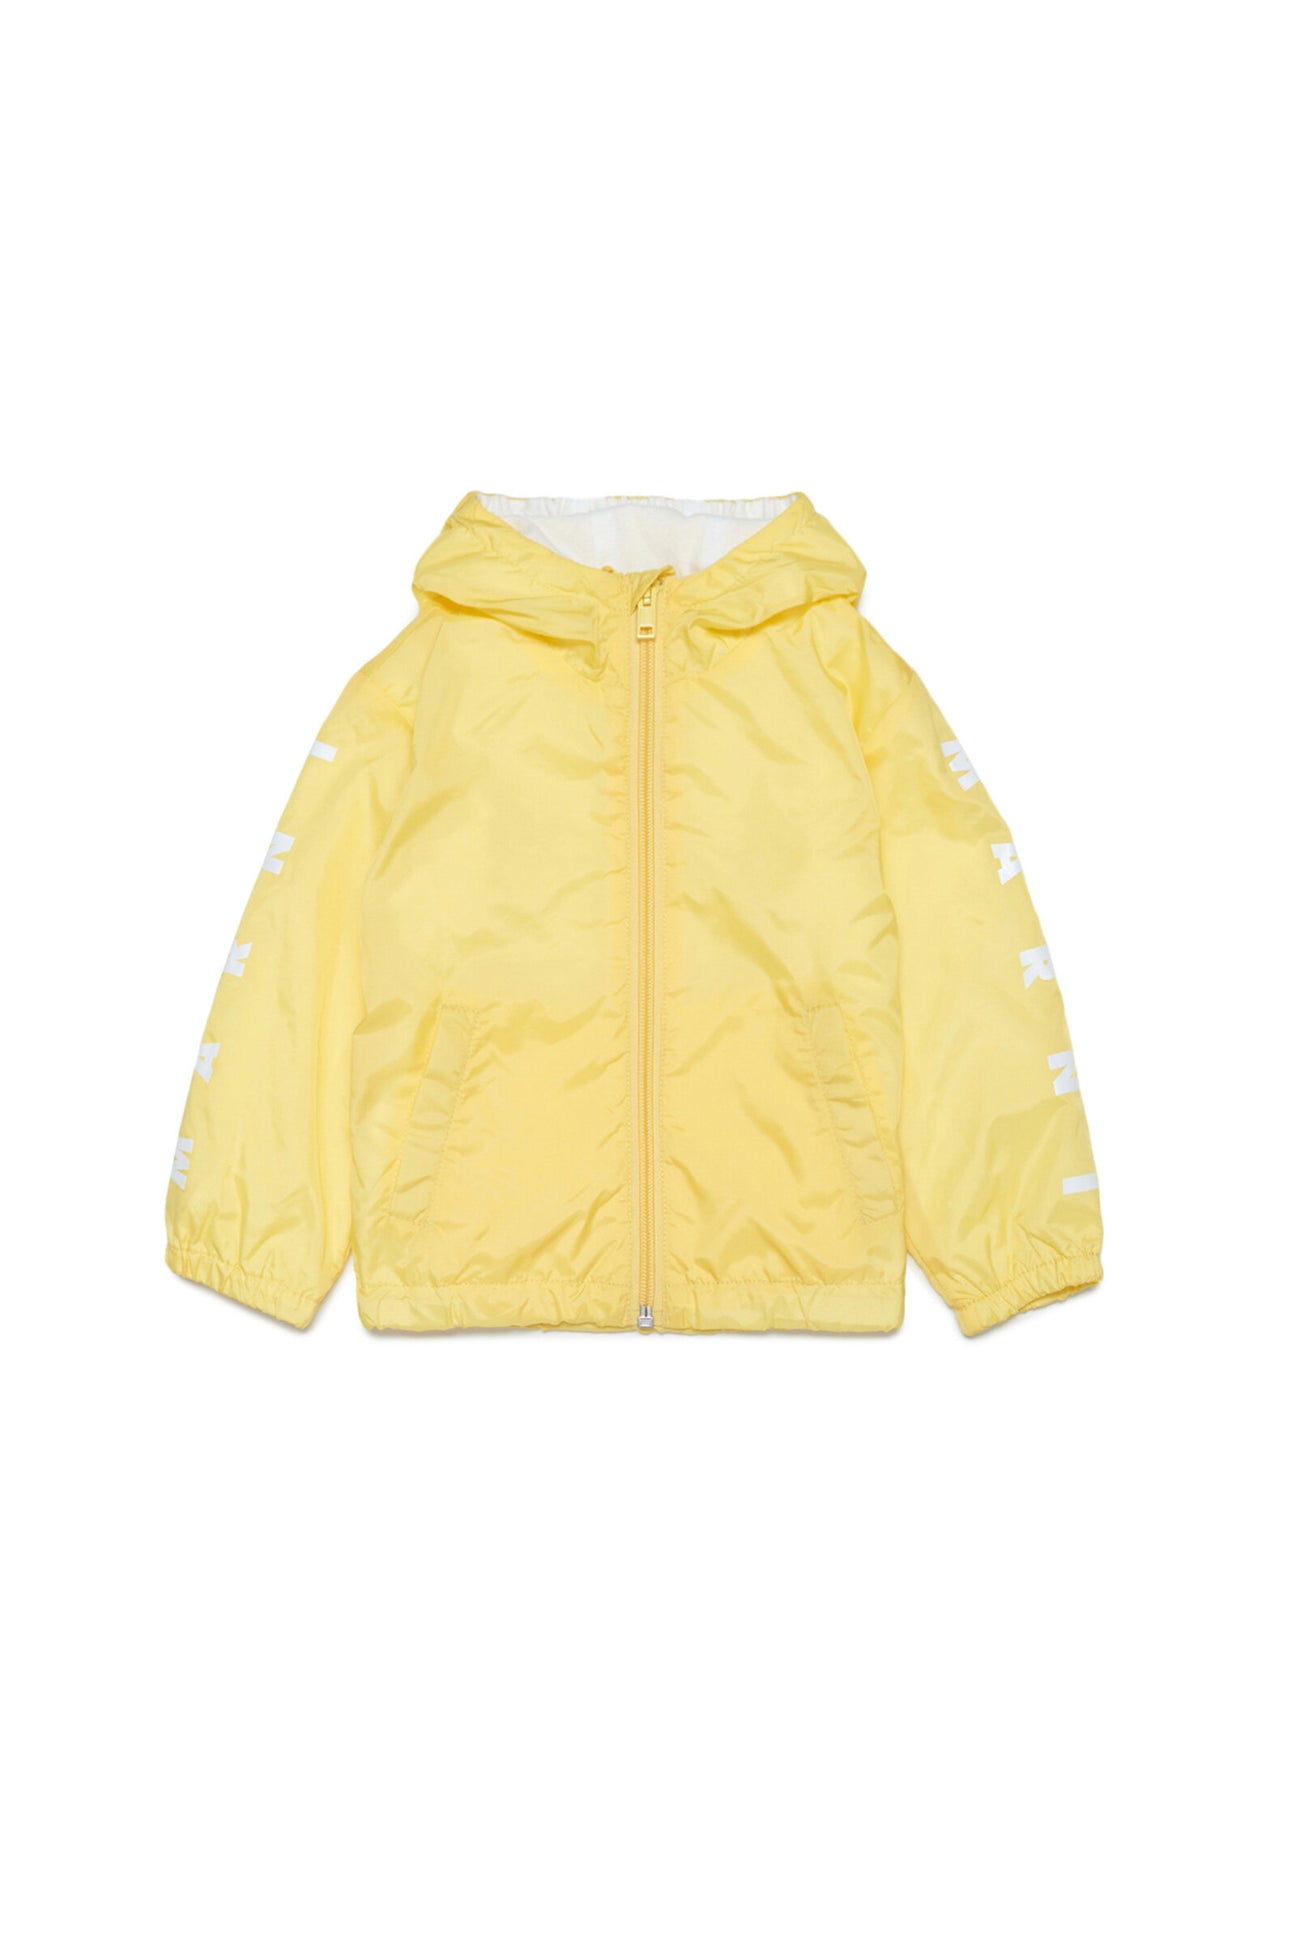 Yellow waterproof lined jacket with hood, zip and logo on the sleeves 